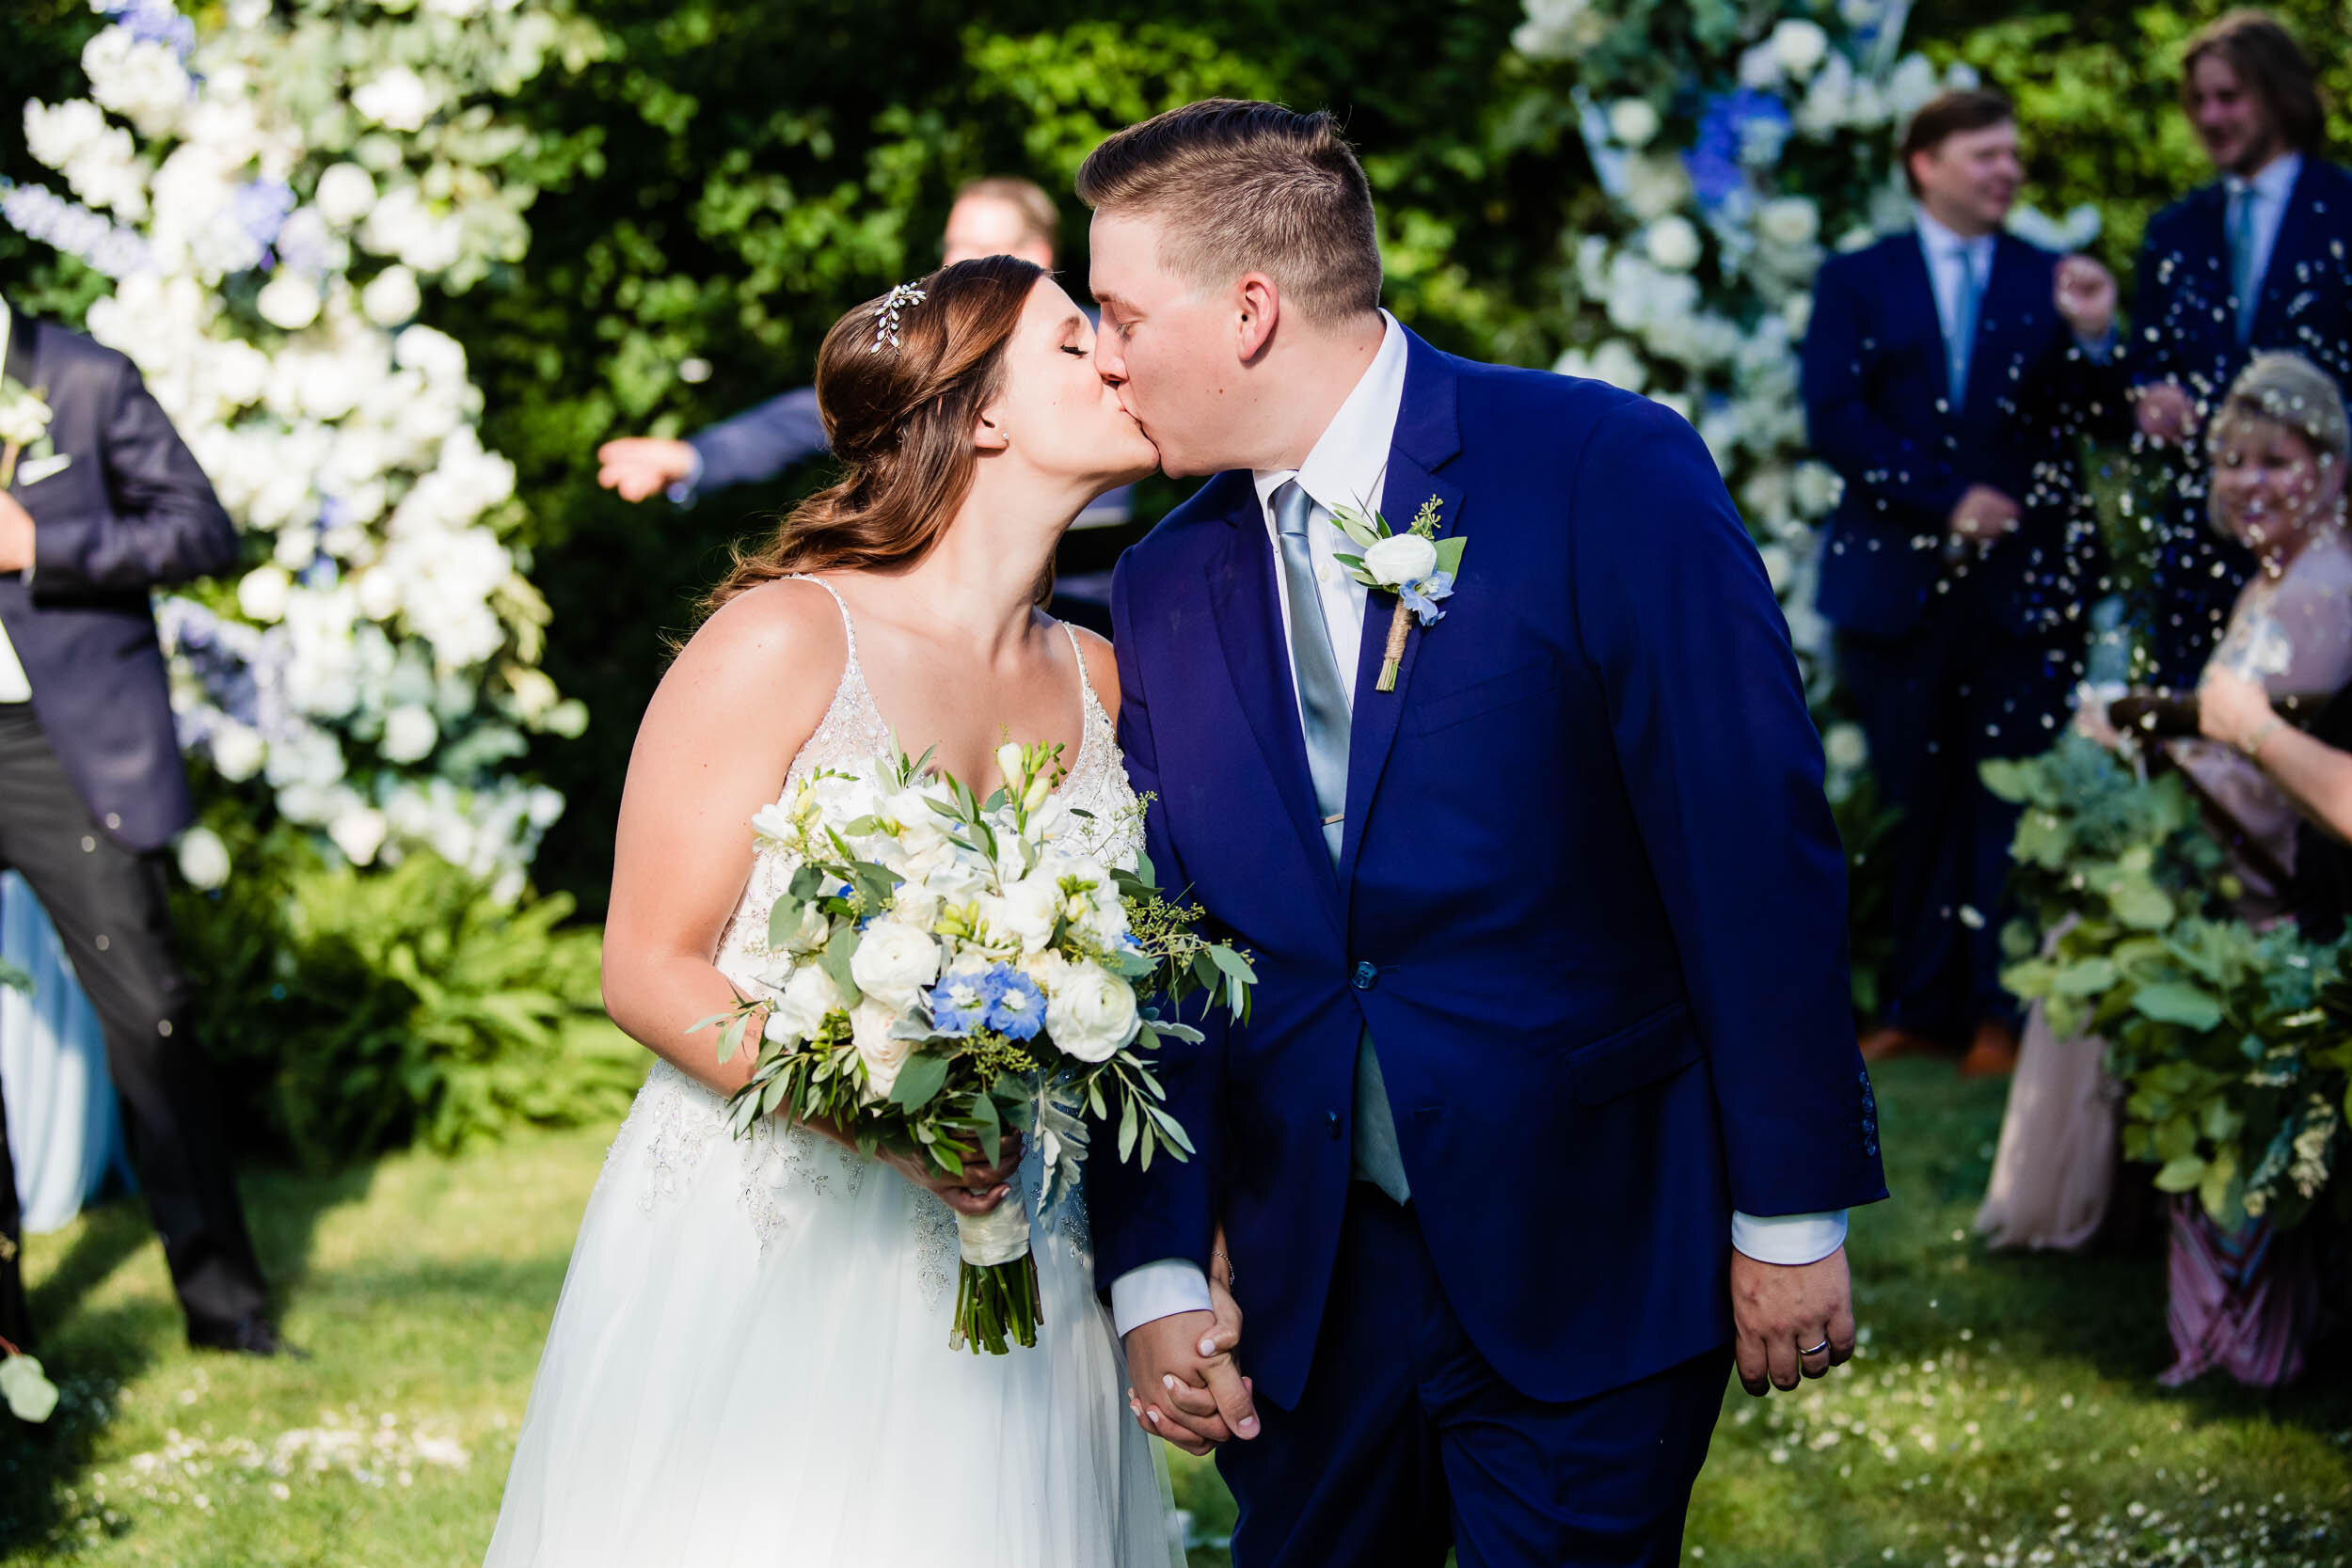 Bride and groom kiss after being married:  Chicago backyard wedding photographed by J. Brown Photography.